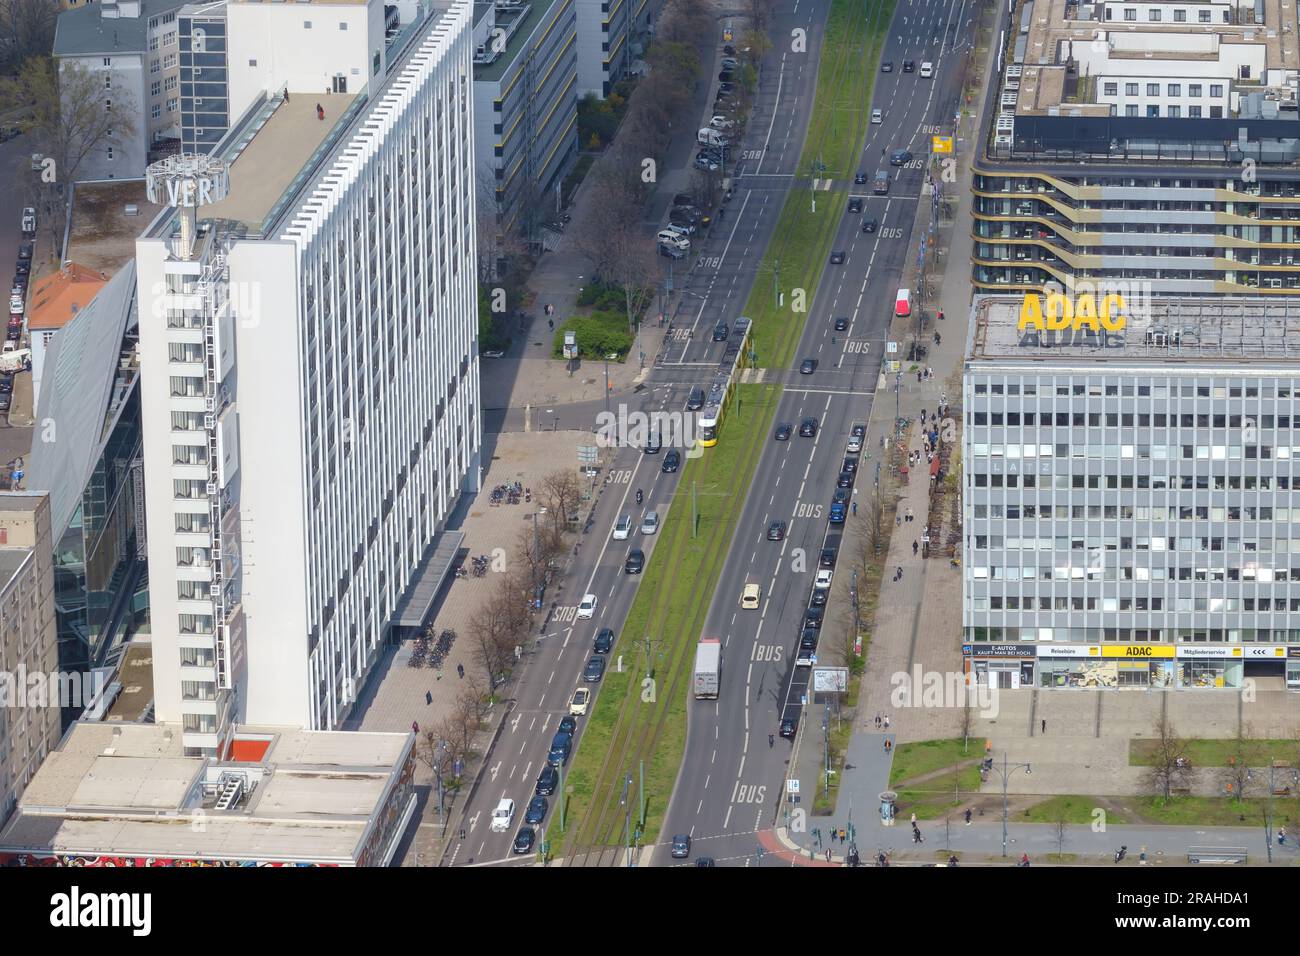 Berlin, Germany - April 19, 2023 : Aerial view of the ADAC, the general German automobile club, which provides roadside assistance in Berlin Germany Stock Photo